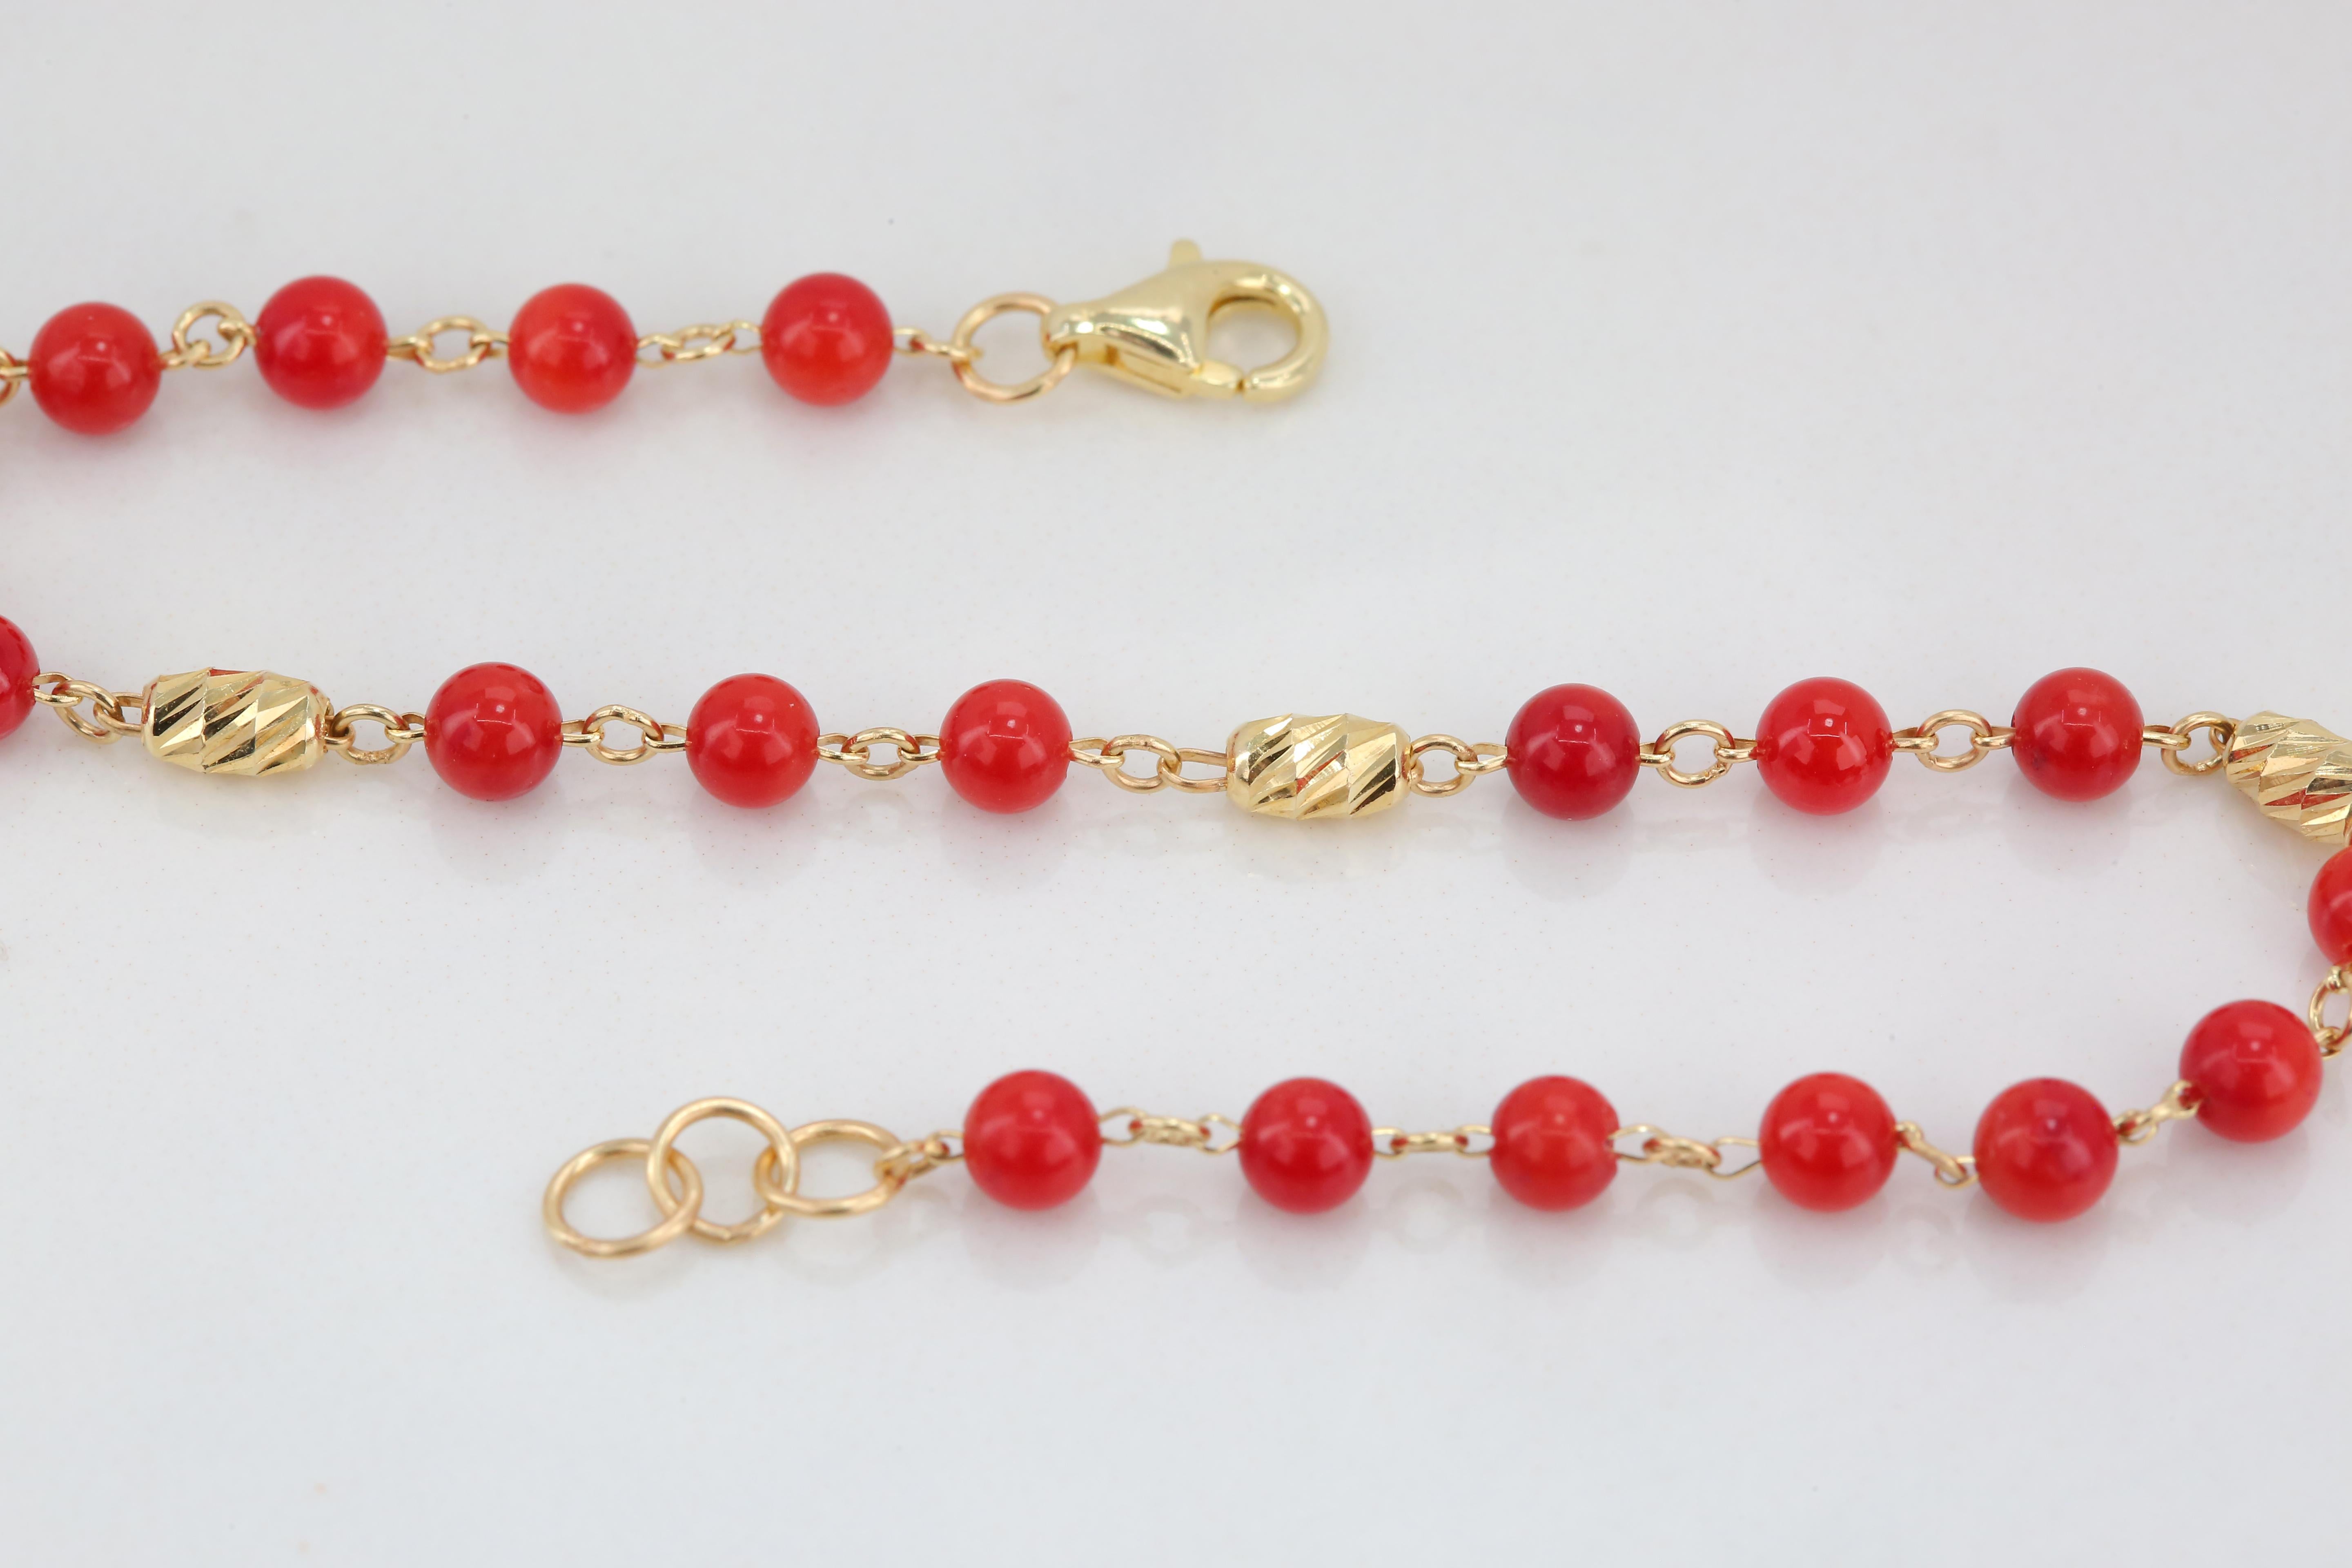 14k gold bracelet with coral stones - 14k gold croal bracelet - Carlos Coral Bracelet delicate bracelet created by hands from chain to the stone shapes. Good ideas of dainty bracelet or stackable bracelet gift for her.

I used coral stones for